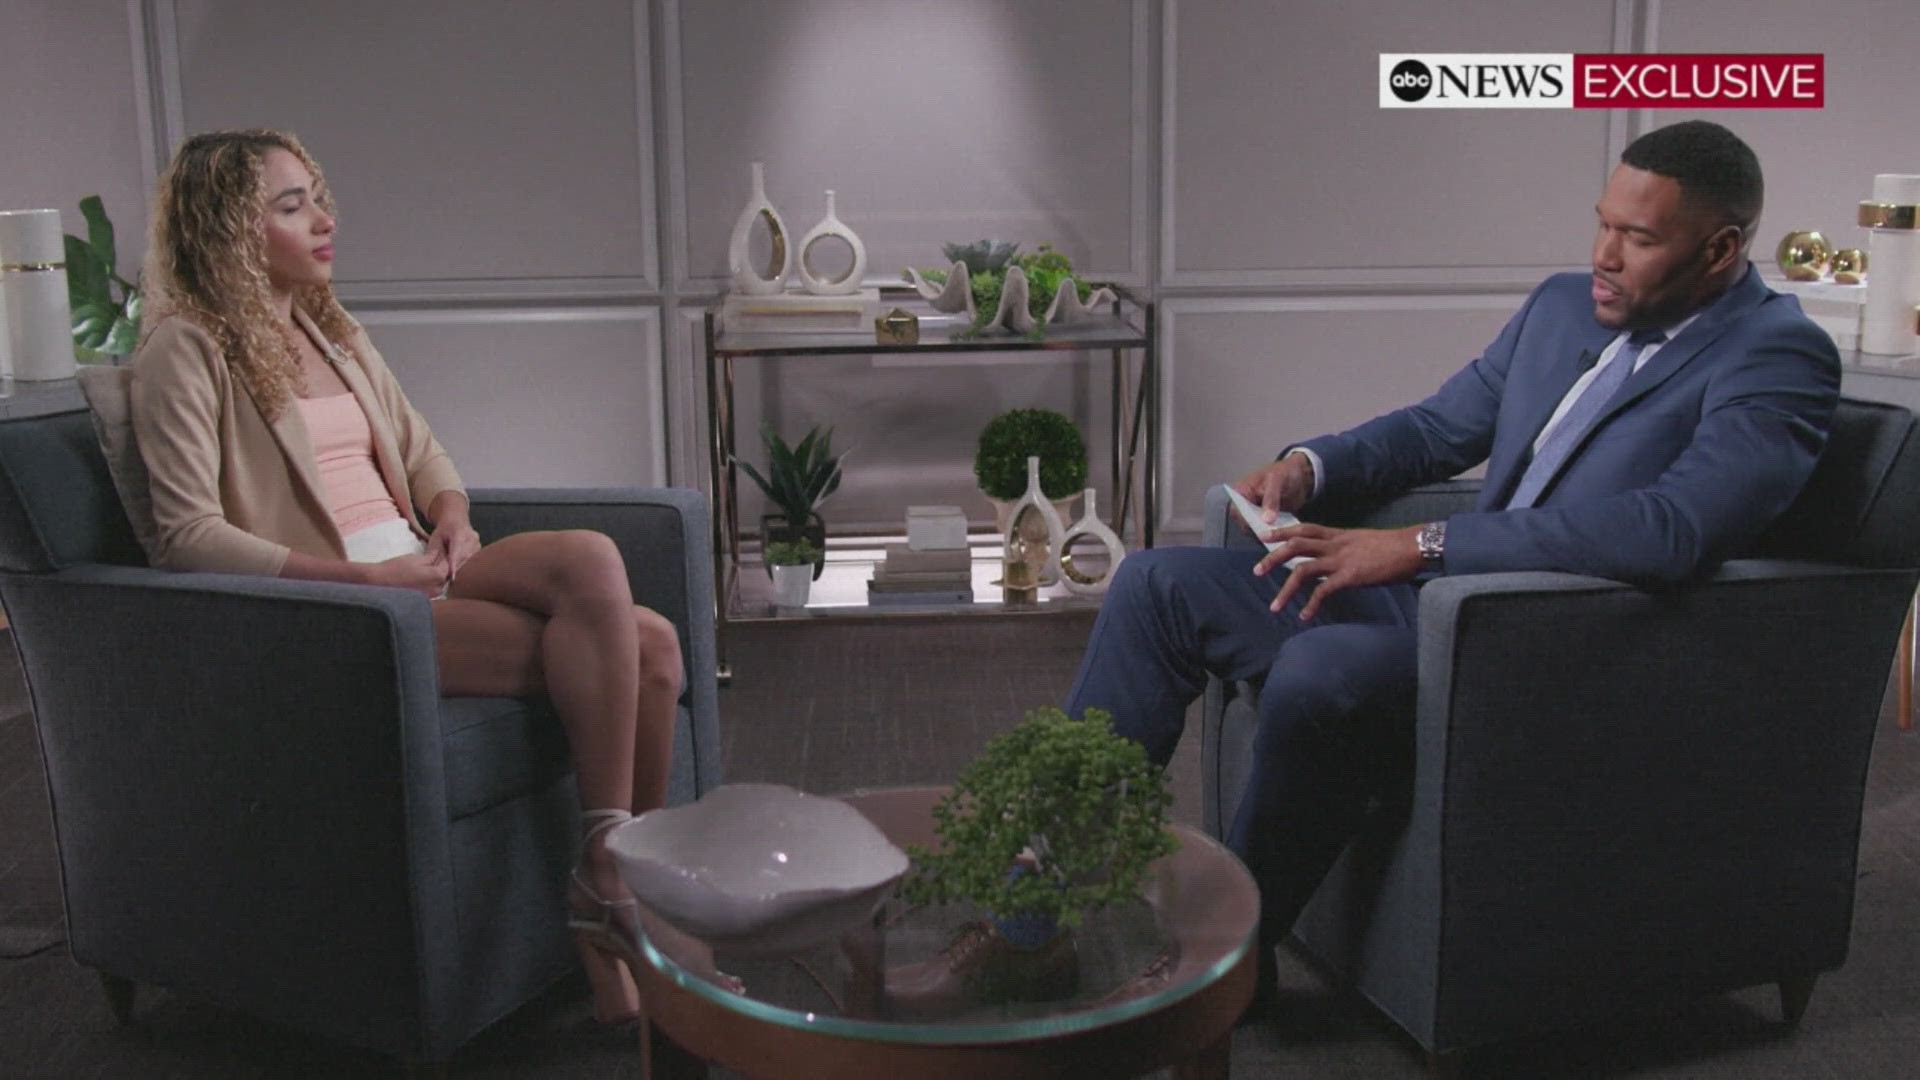 ABC's Michael Strahan sat down with Payton Washington to talk about the random violence that almost ended her life.